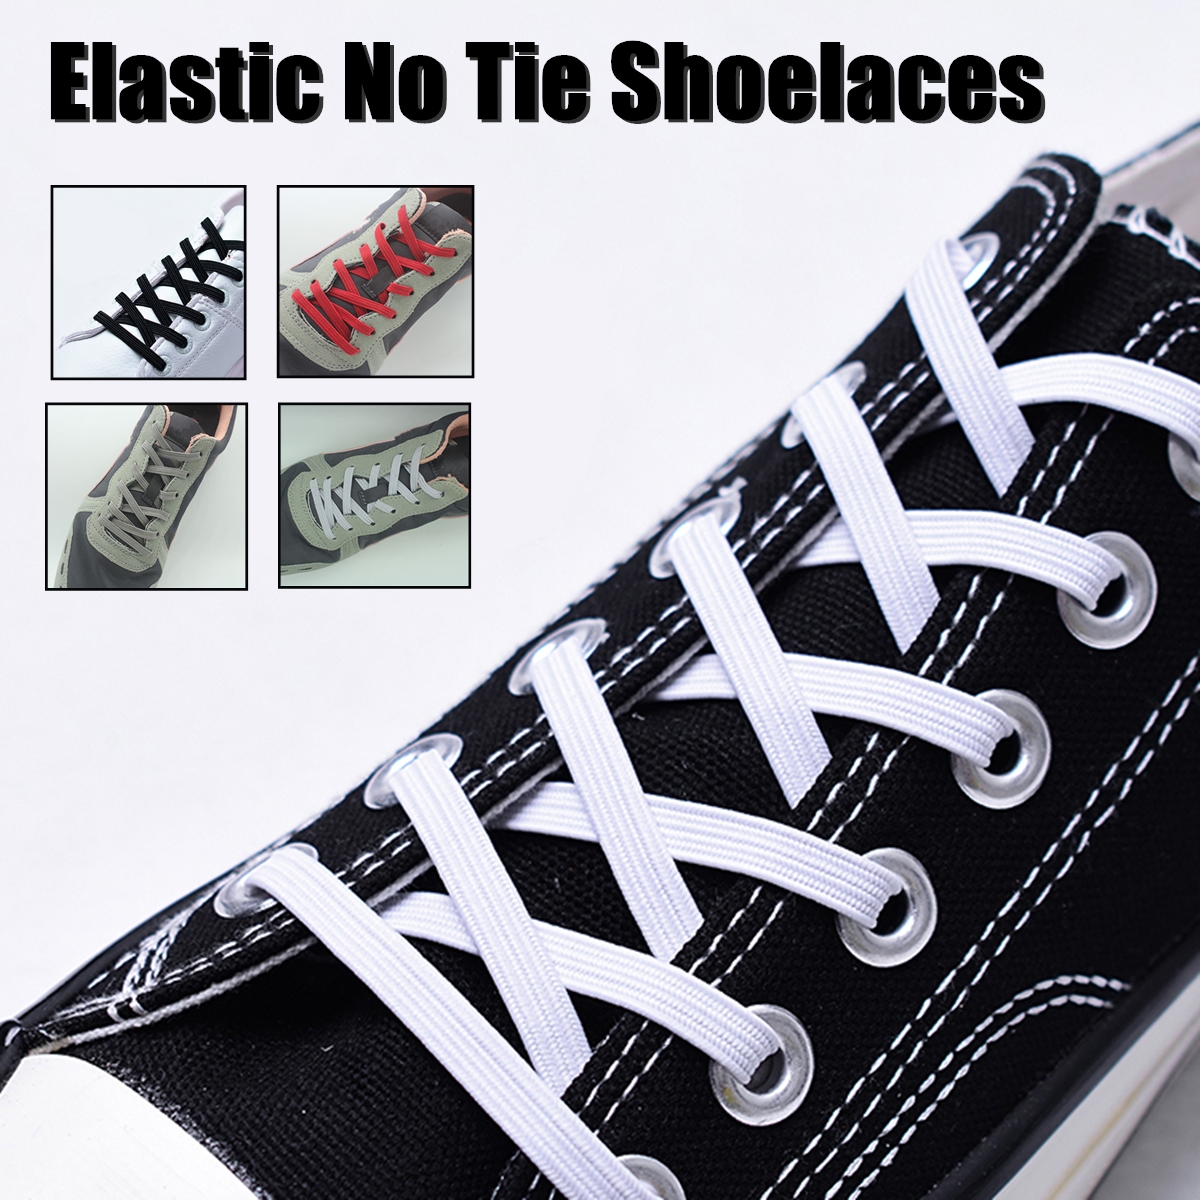 2Pcs-100cm-Elastic-No-Tie-Shoelaces-Lazy-Free-Tie-Sneaker-Laces-With-Buckles-Sports-Running-1470098-5